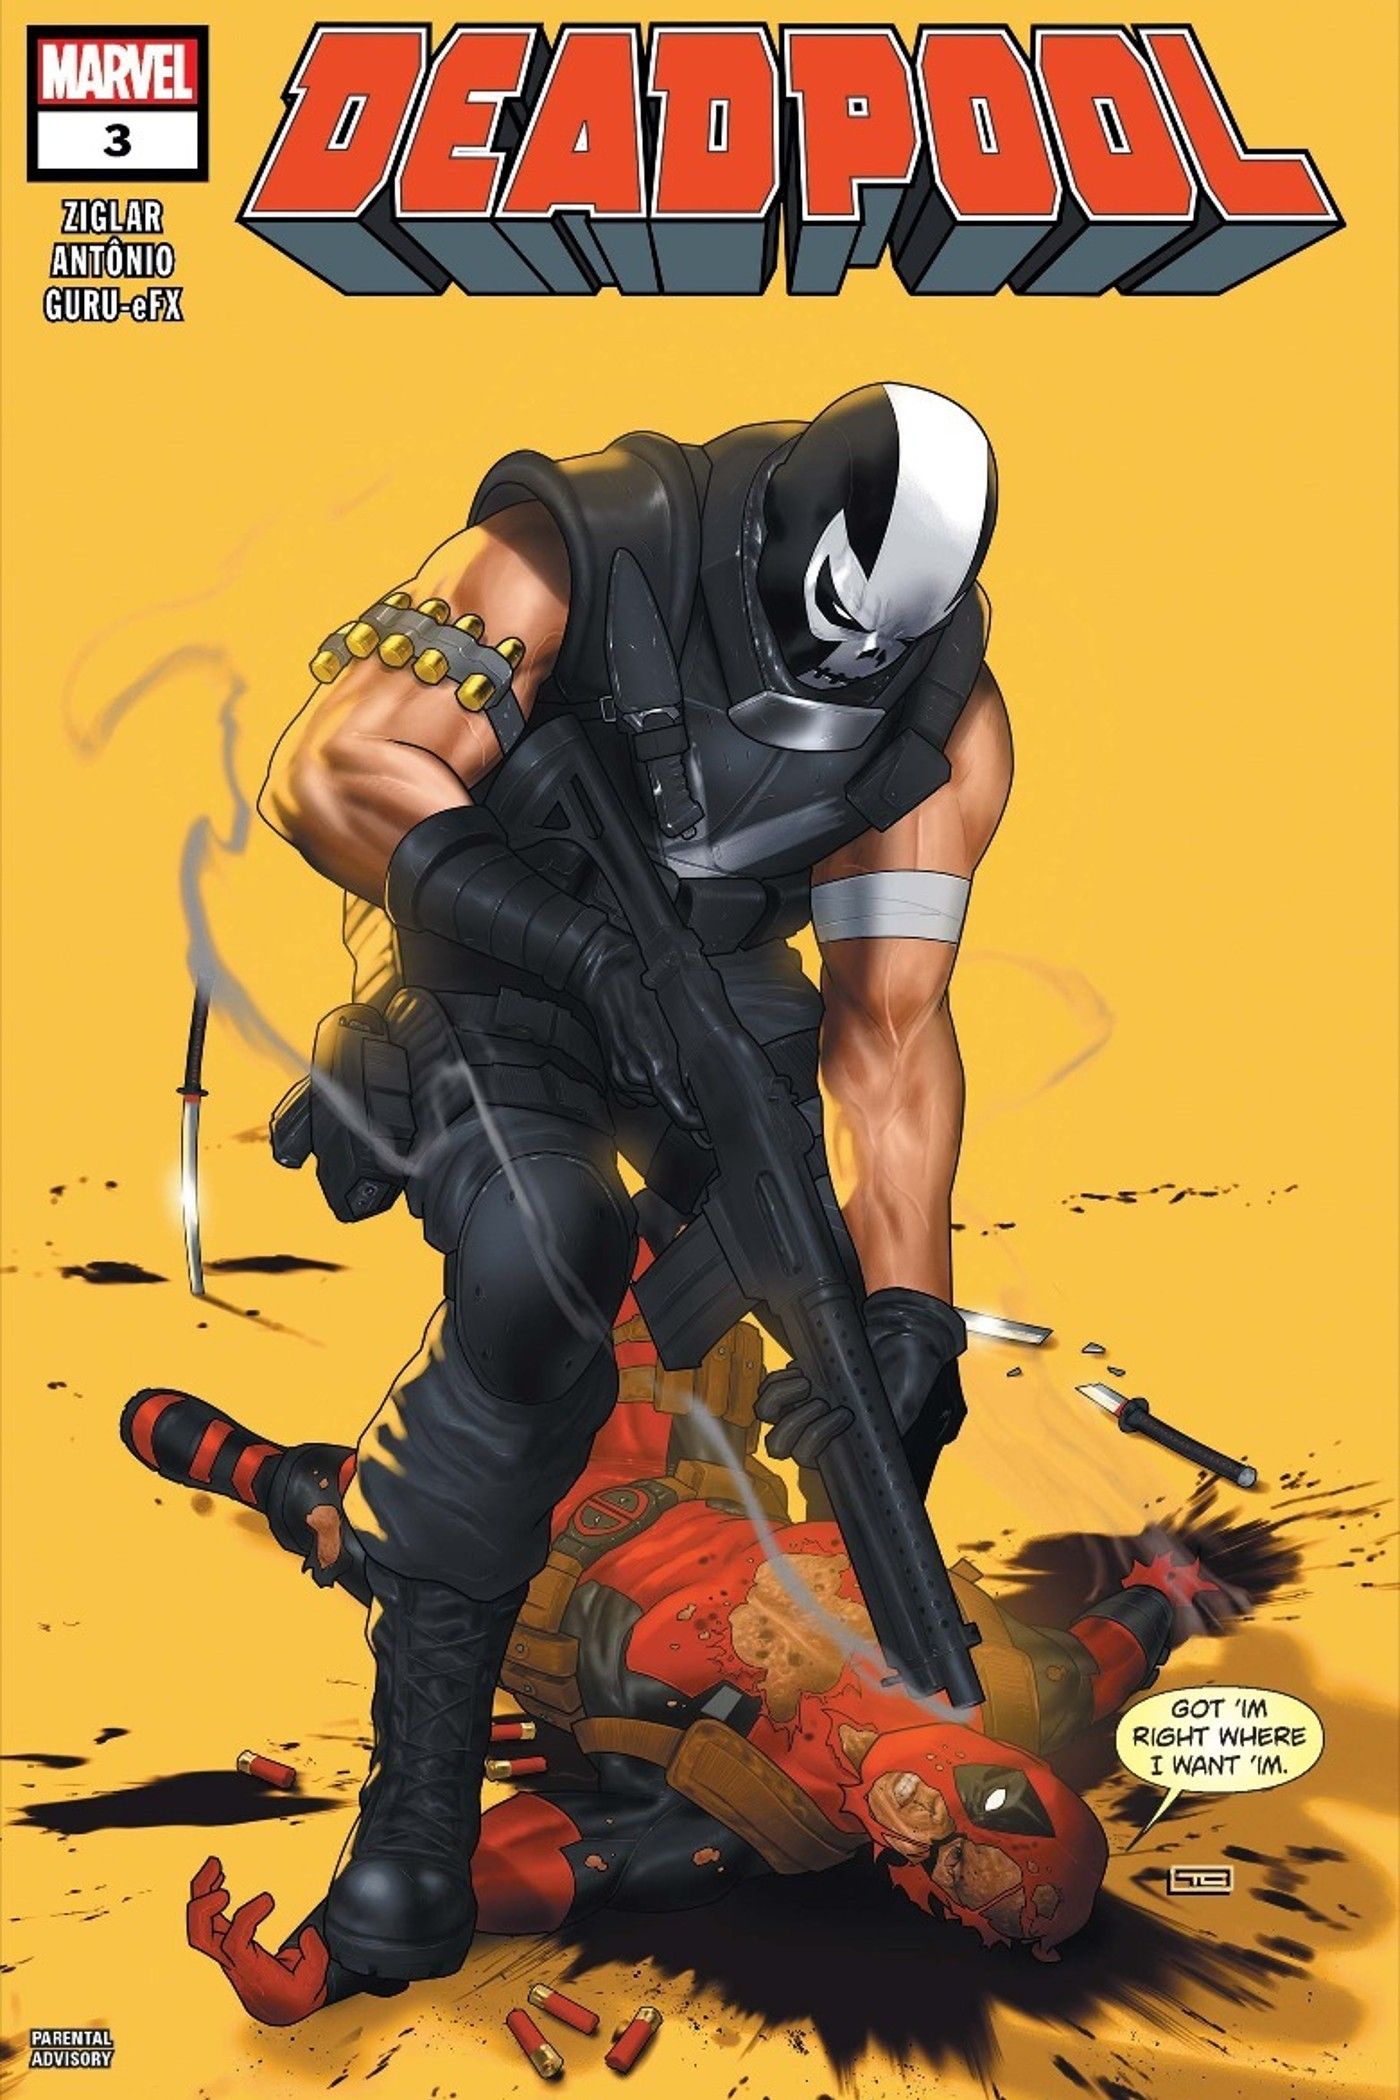 Crossbones puts his gun in Wade Wilson's face on the cover of Deadpool #3